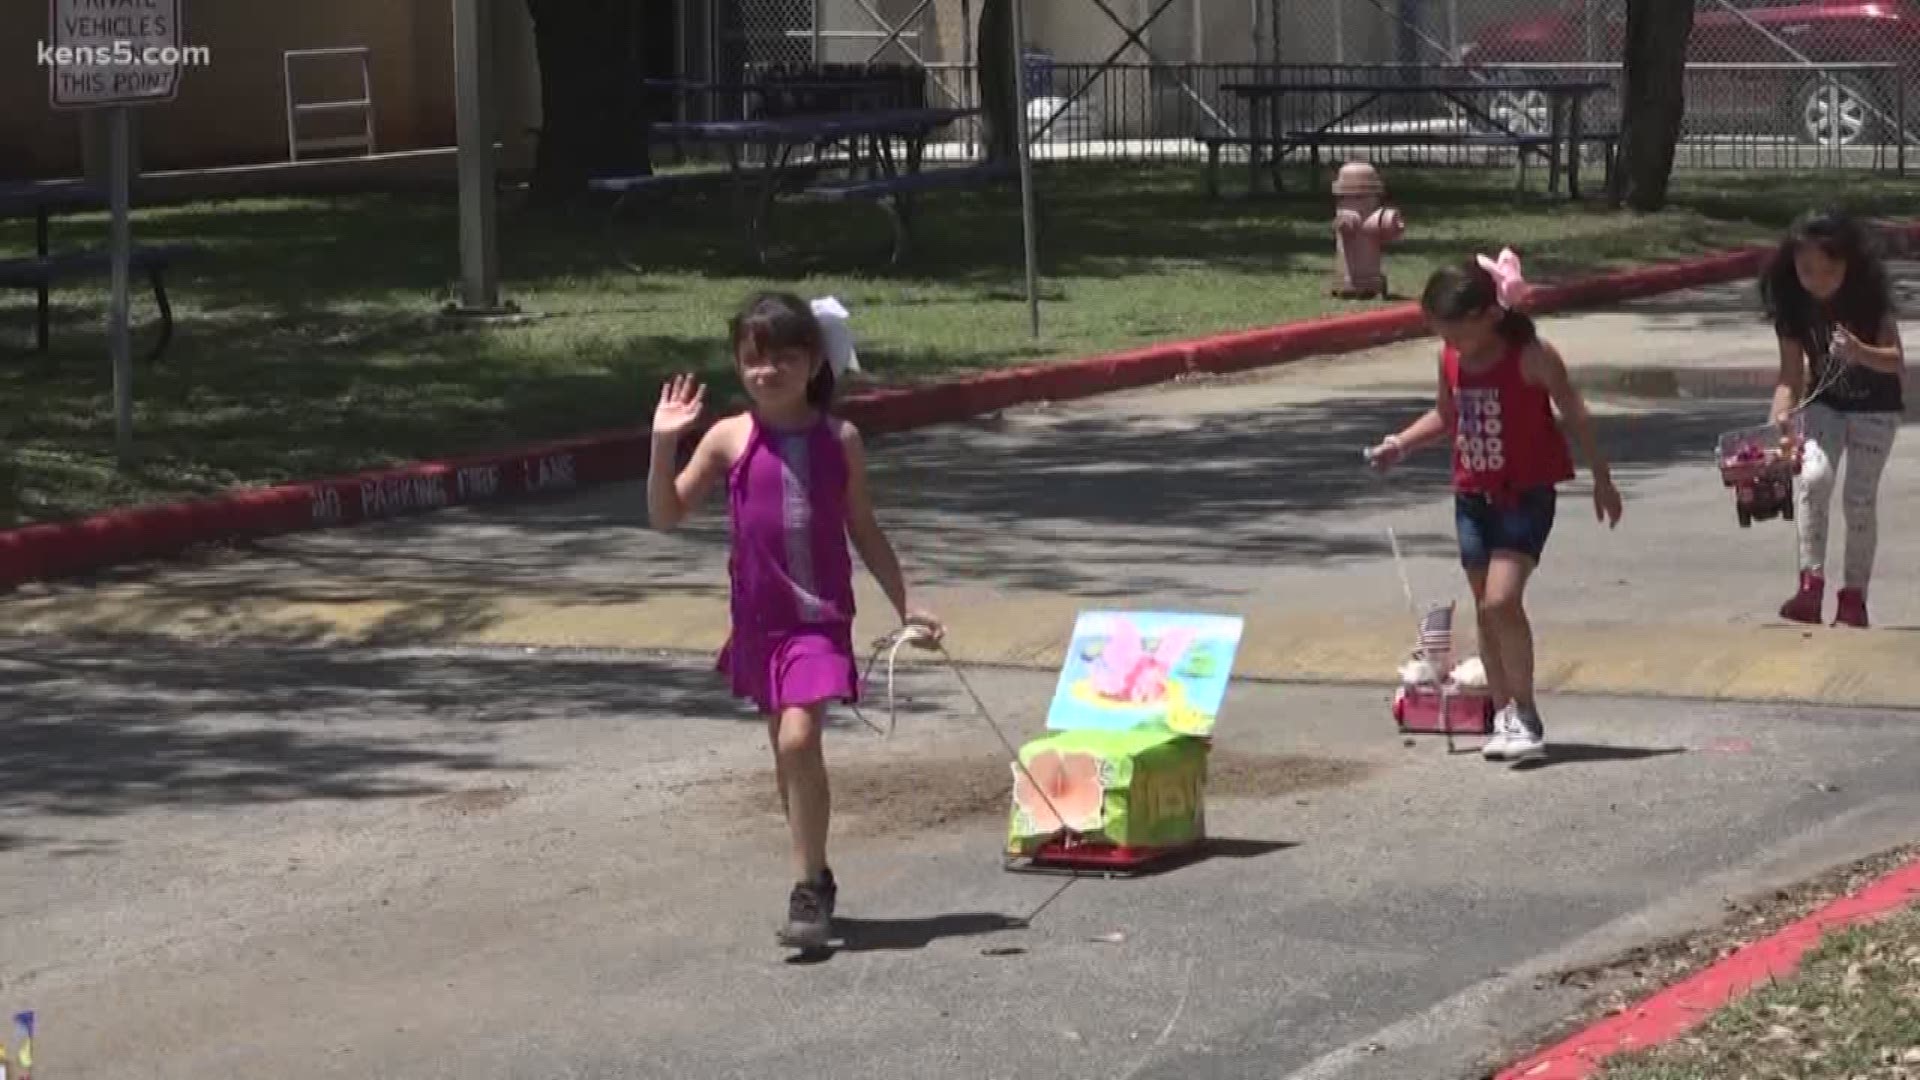 Over the last two weeks, area schools have been gearing up for Fiesta with their own parades, showing off shoebox floats that have been a tradition for elementary kids for decades.